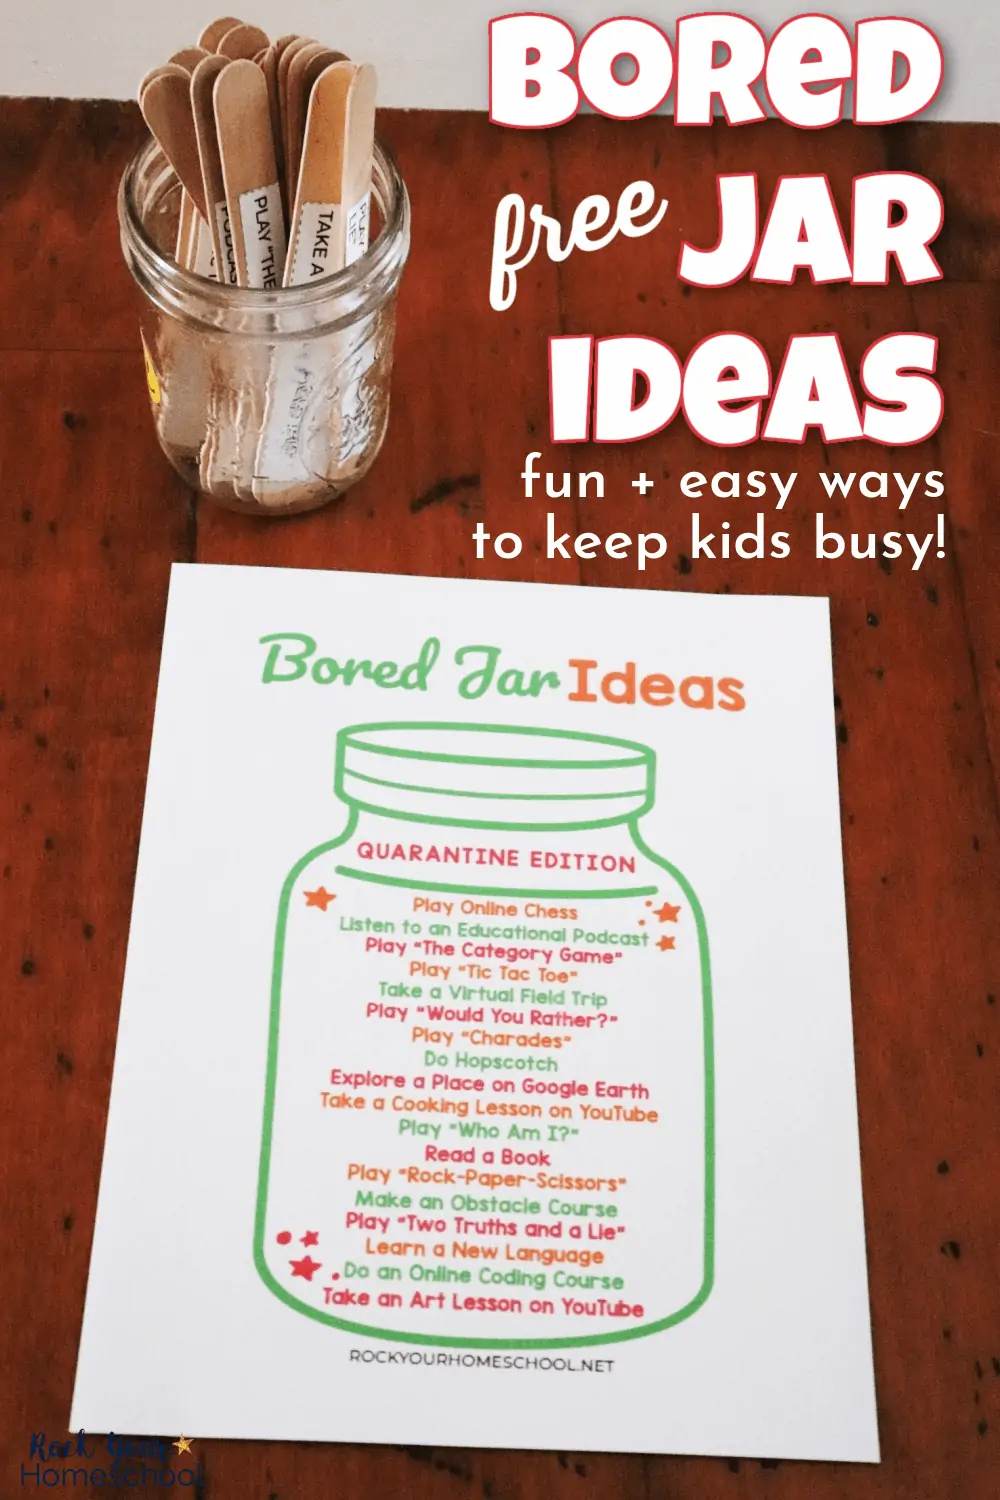 Free Bored Jar Ideas for Easy Ways to Keep Kids Happy